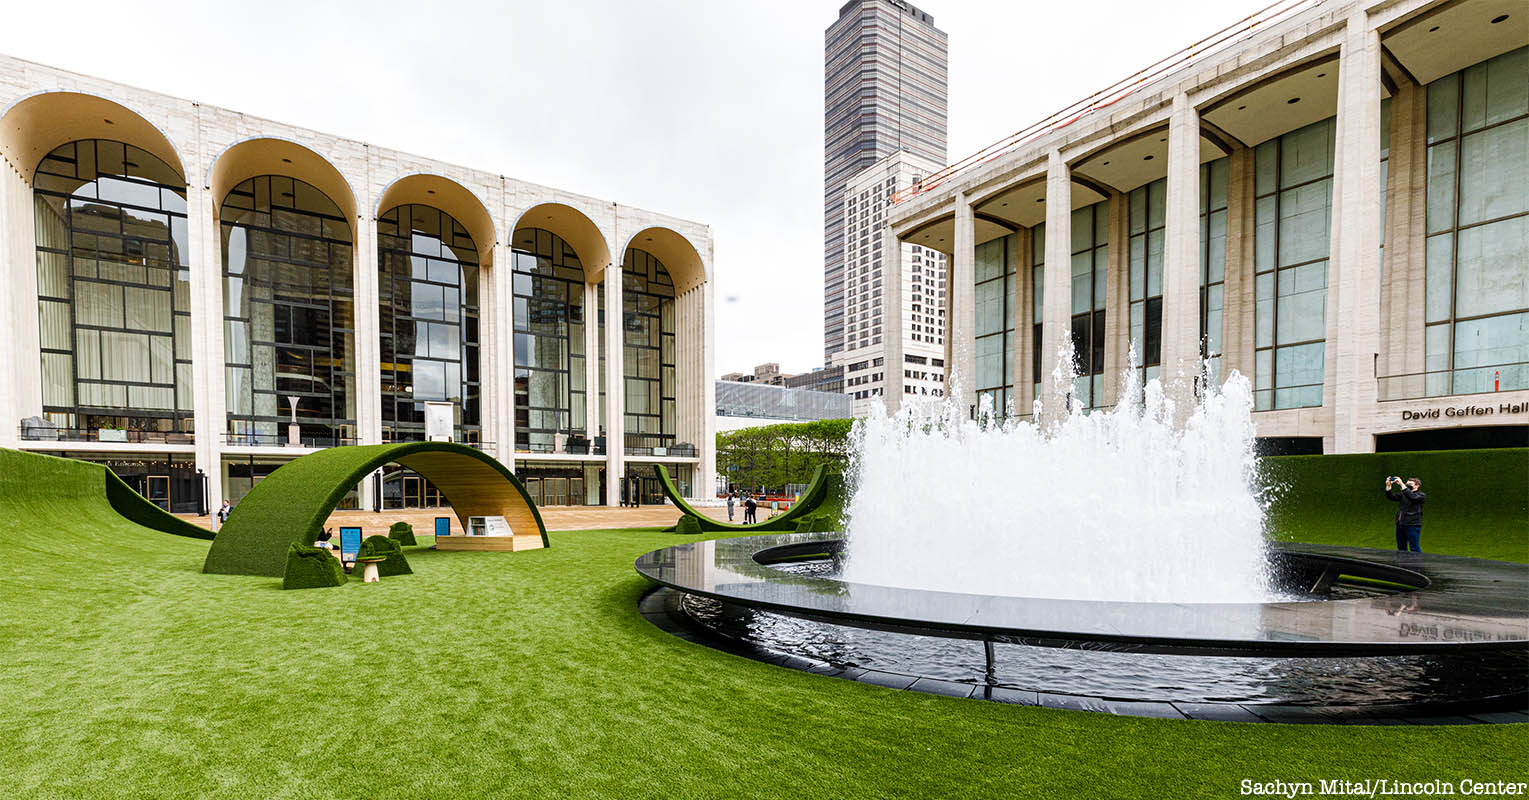 The GREEN at Lincoln Center's Restart Stages